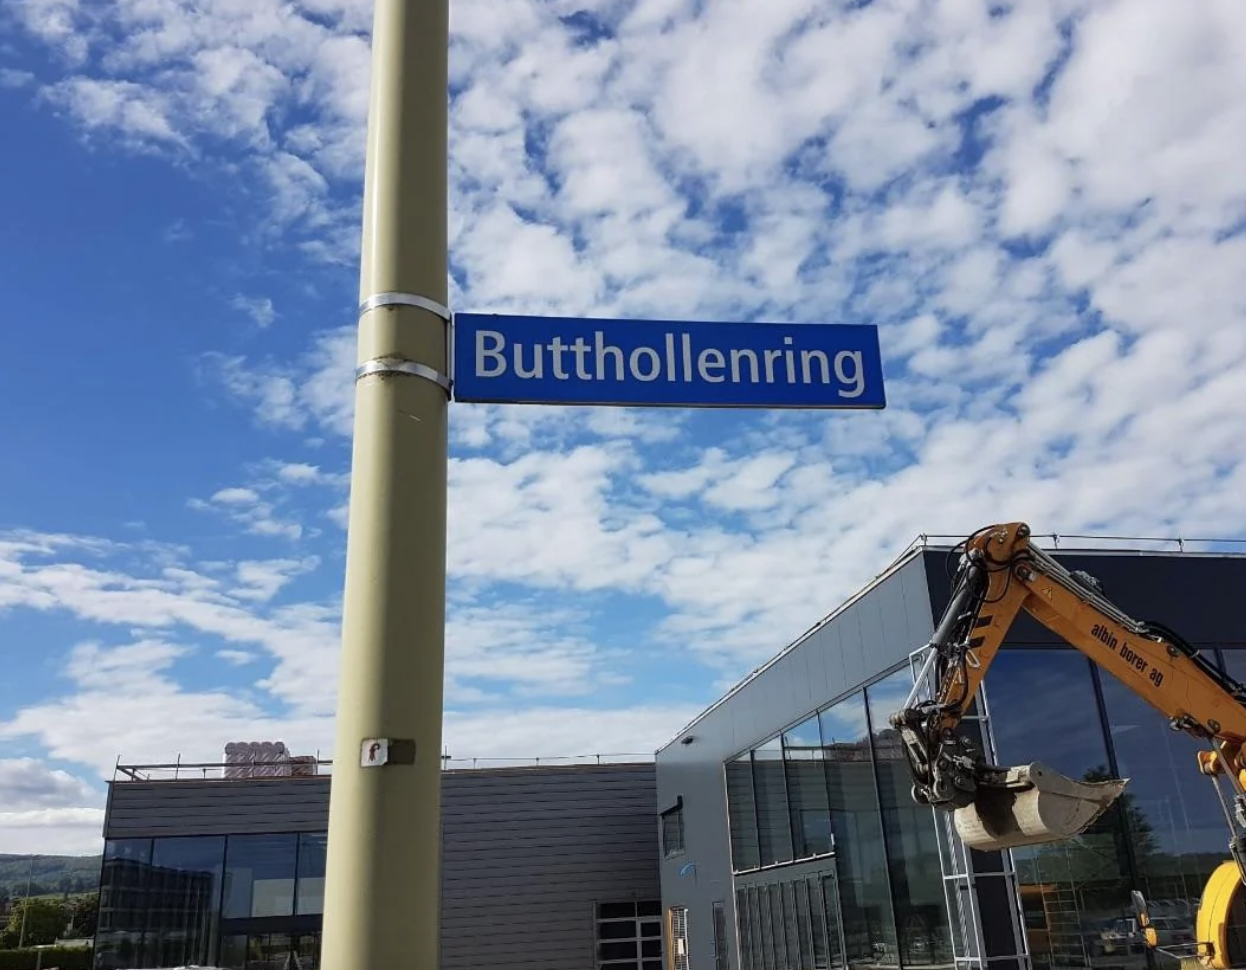 Sign reading &#x27;Butthollenring&#x27; above a street, with a clear sky, construction equipment, and a building in the background